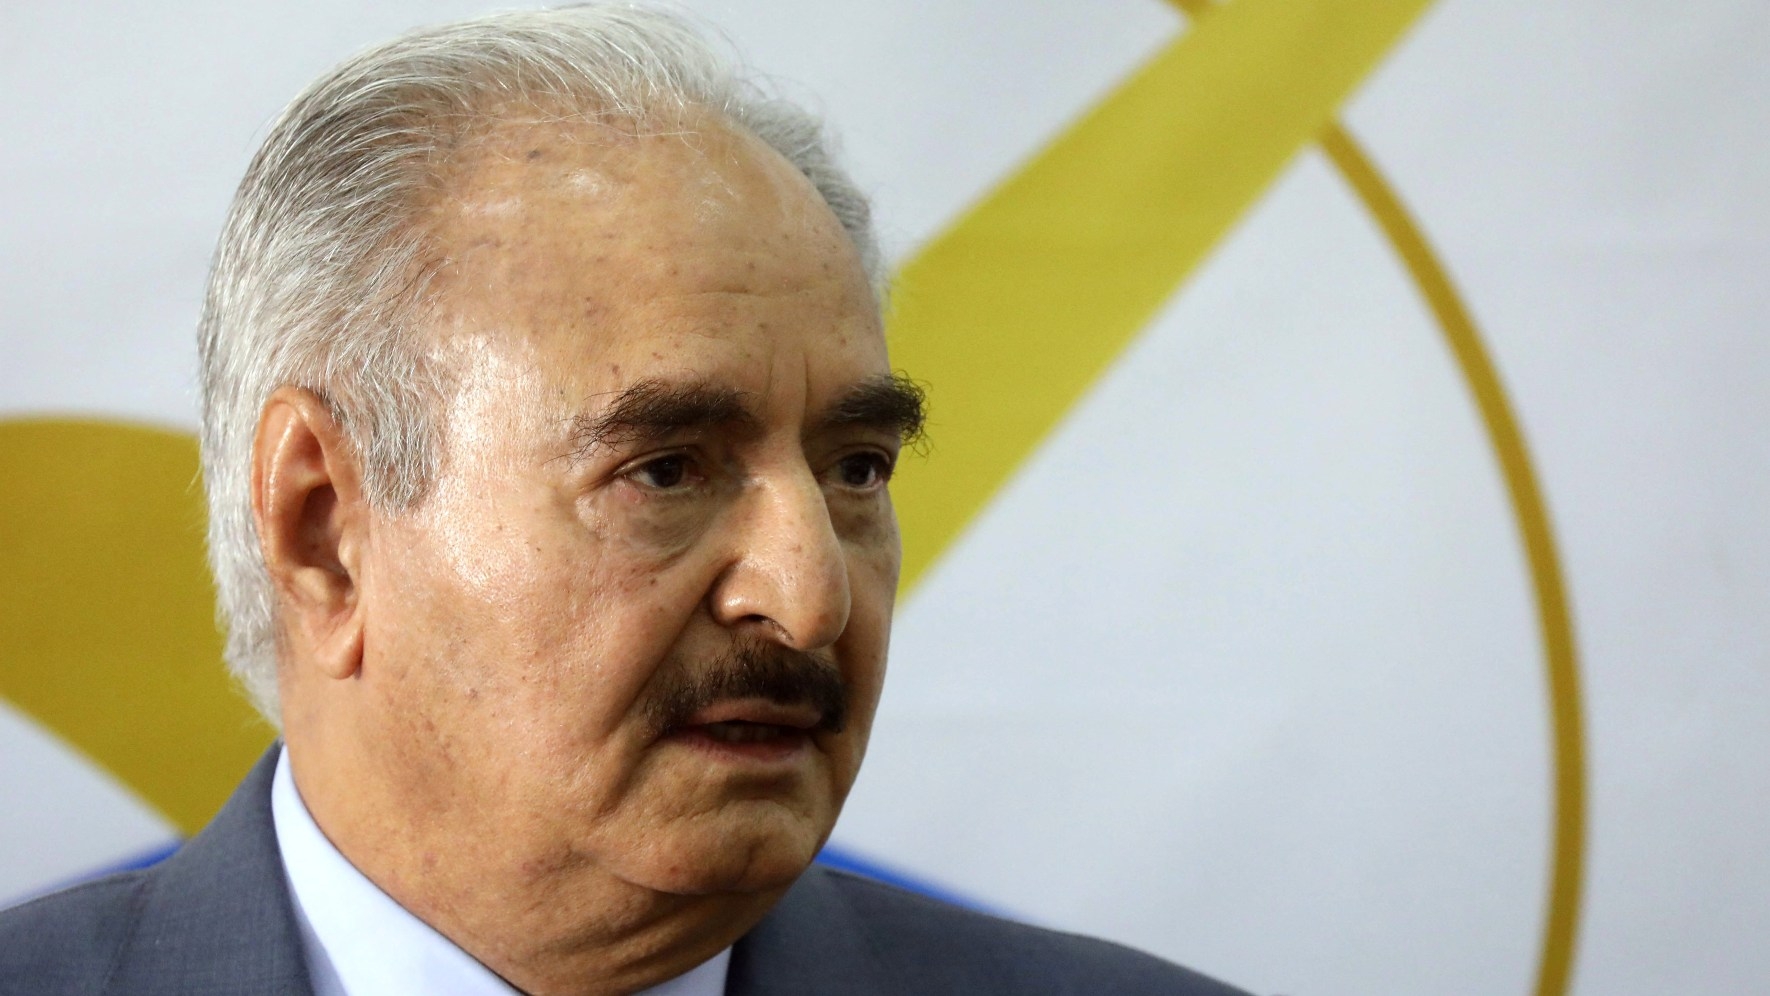 In 2019, Haftar led a failed assault on Libya's internationally recognised government in Tripoli but was pushed back following Turkish military intervention.